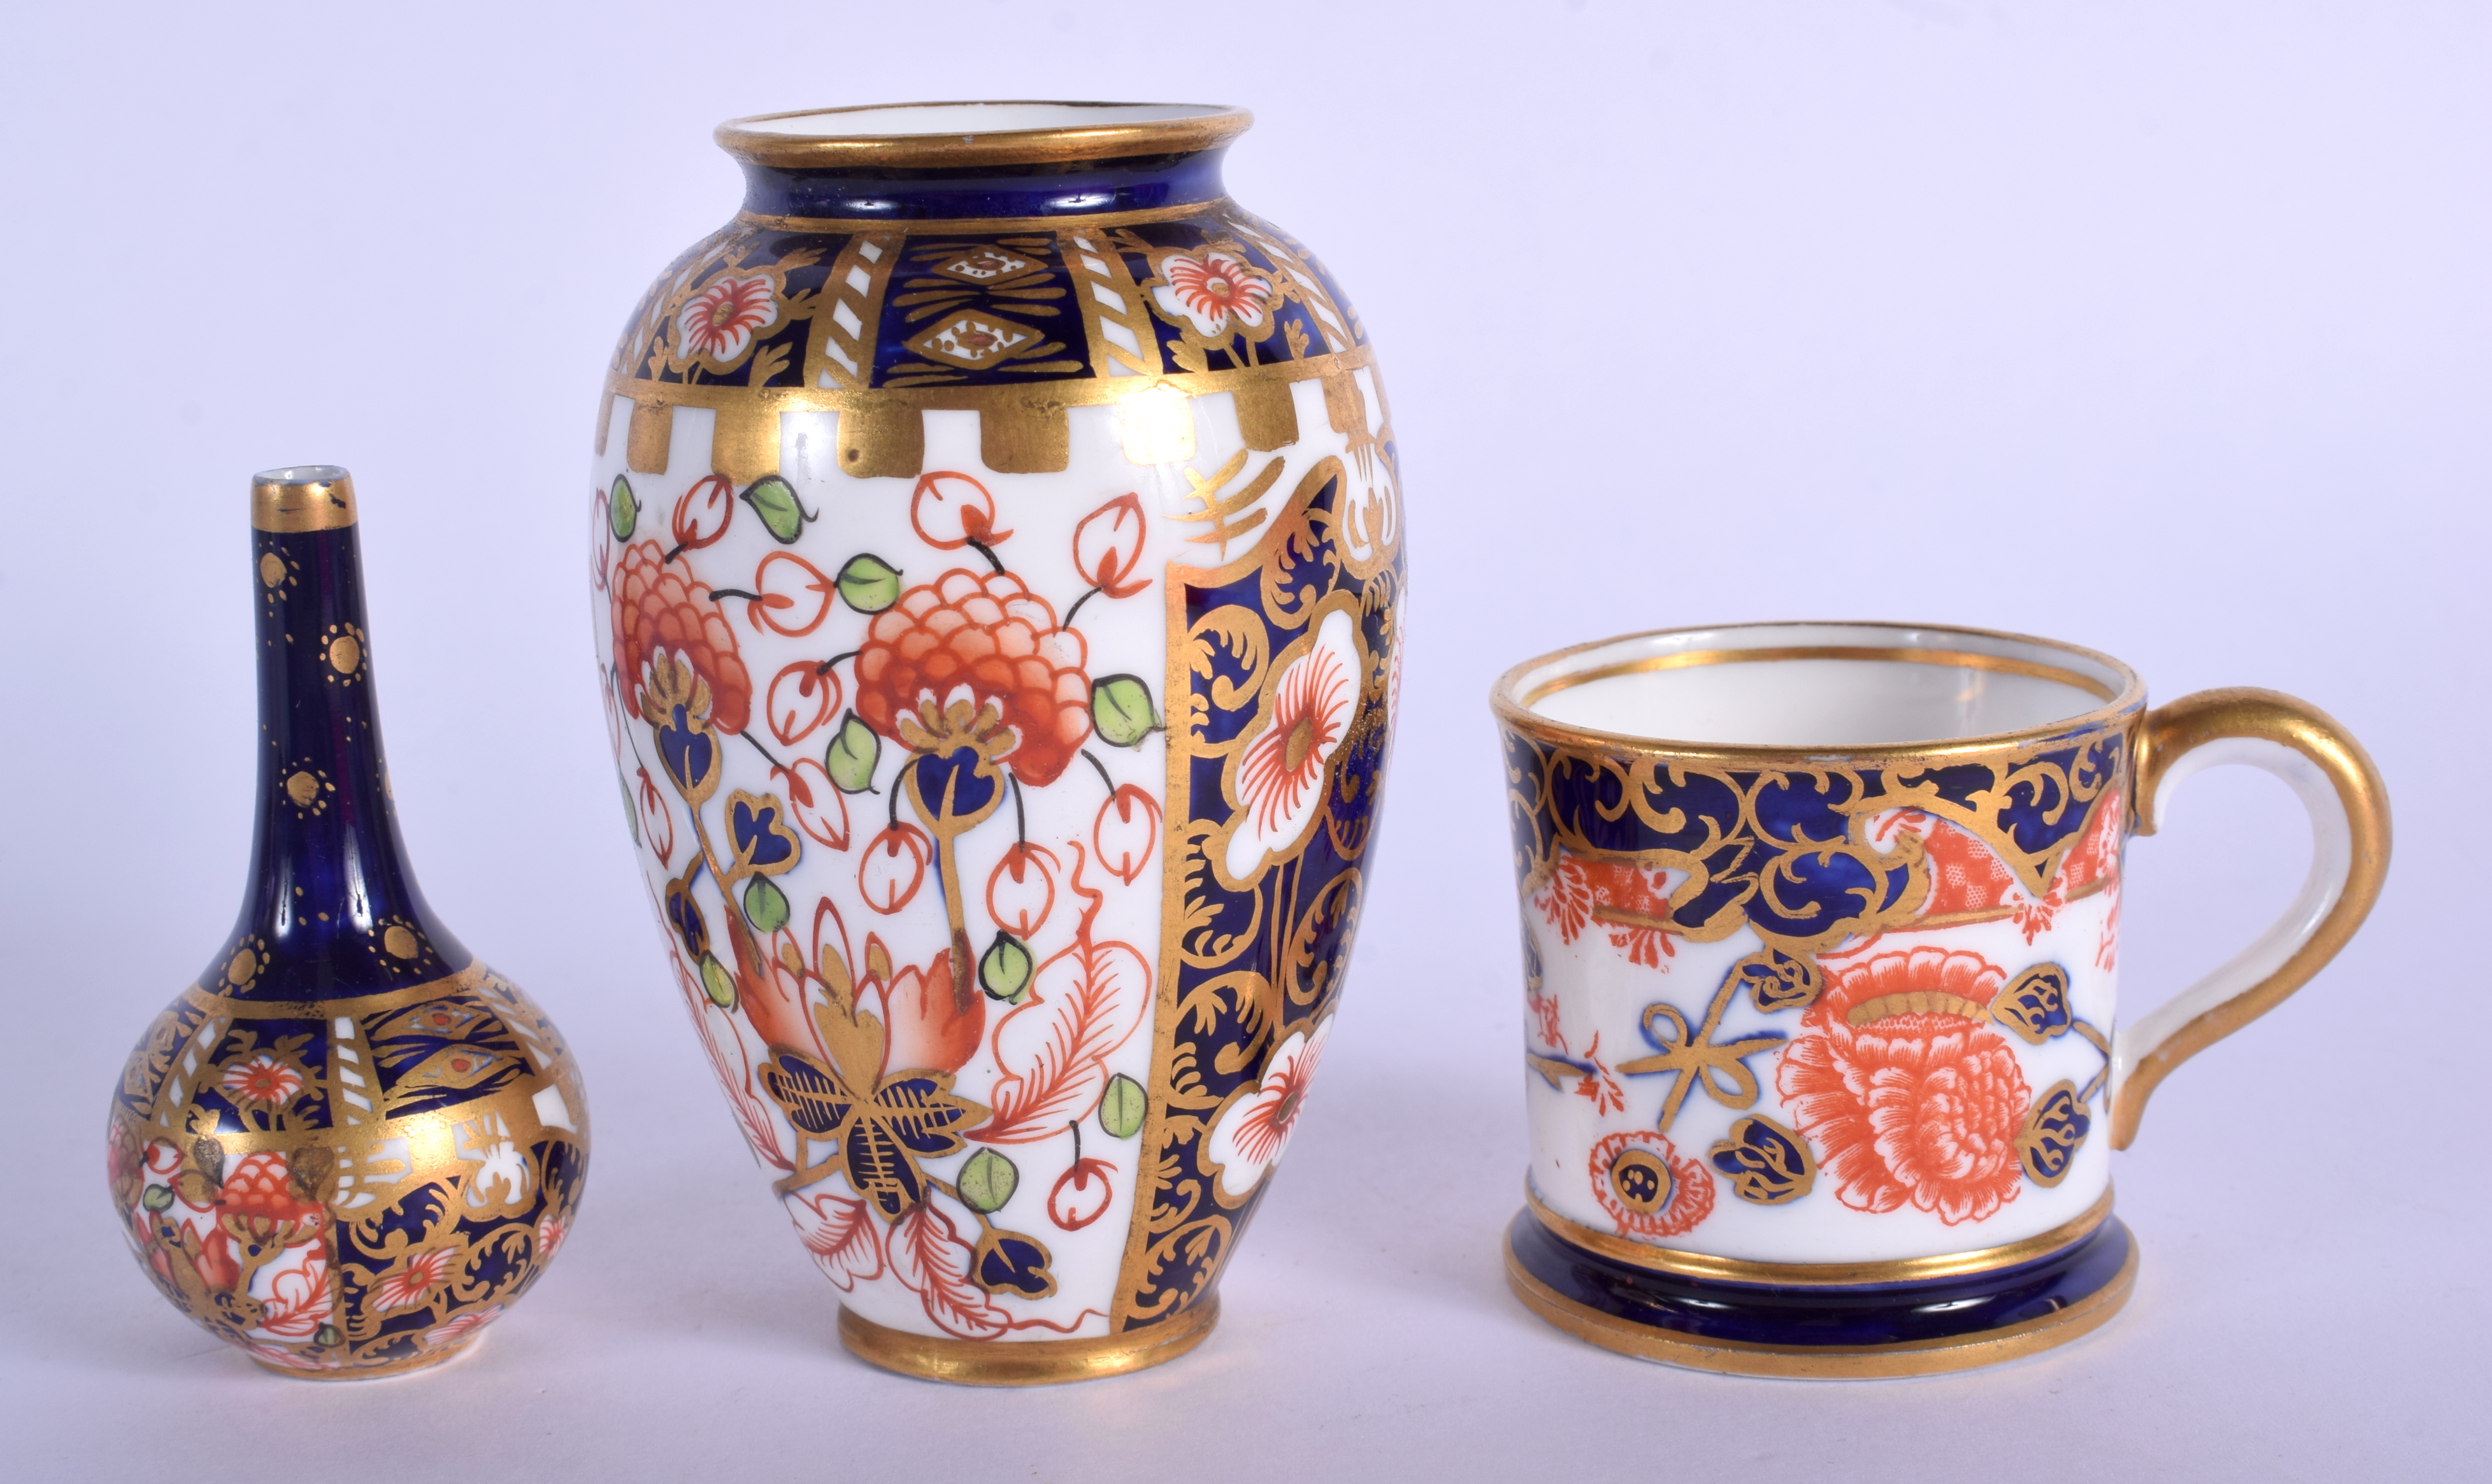 Royal Crown Derby imari pattern 6299 small vase, a bottle vase in the same pattern and a 26469 minia